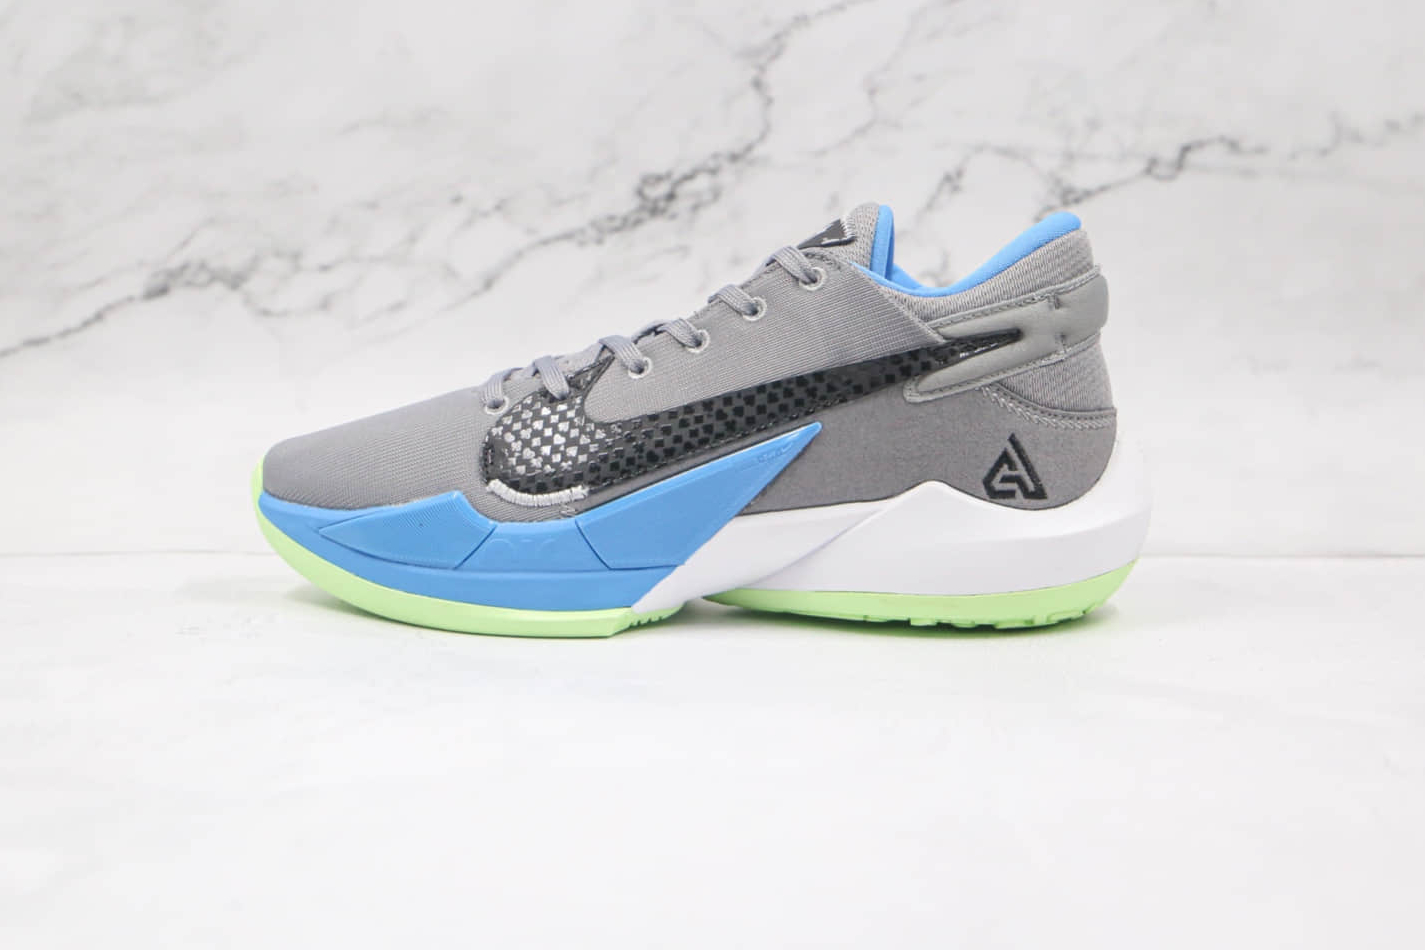 Nike Zoom Freak 2 Particle Grey CK5424-004 - Lightweight Performance Basketball Shoes